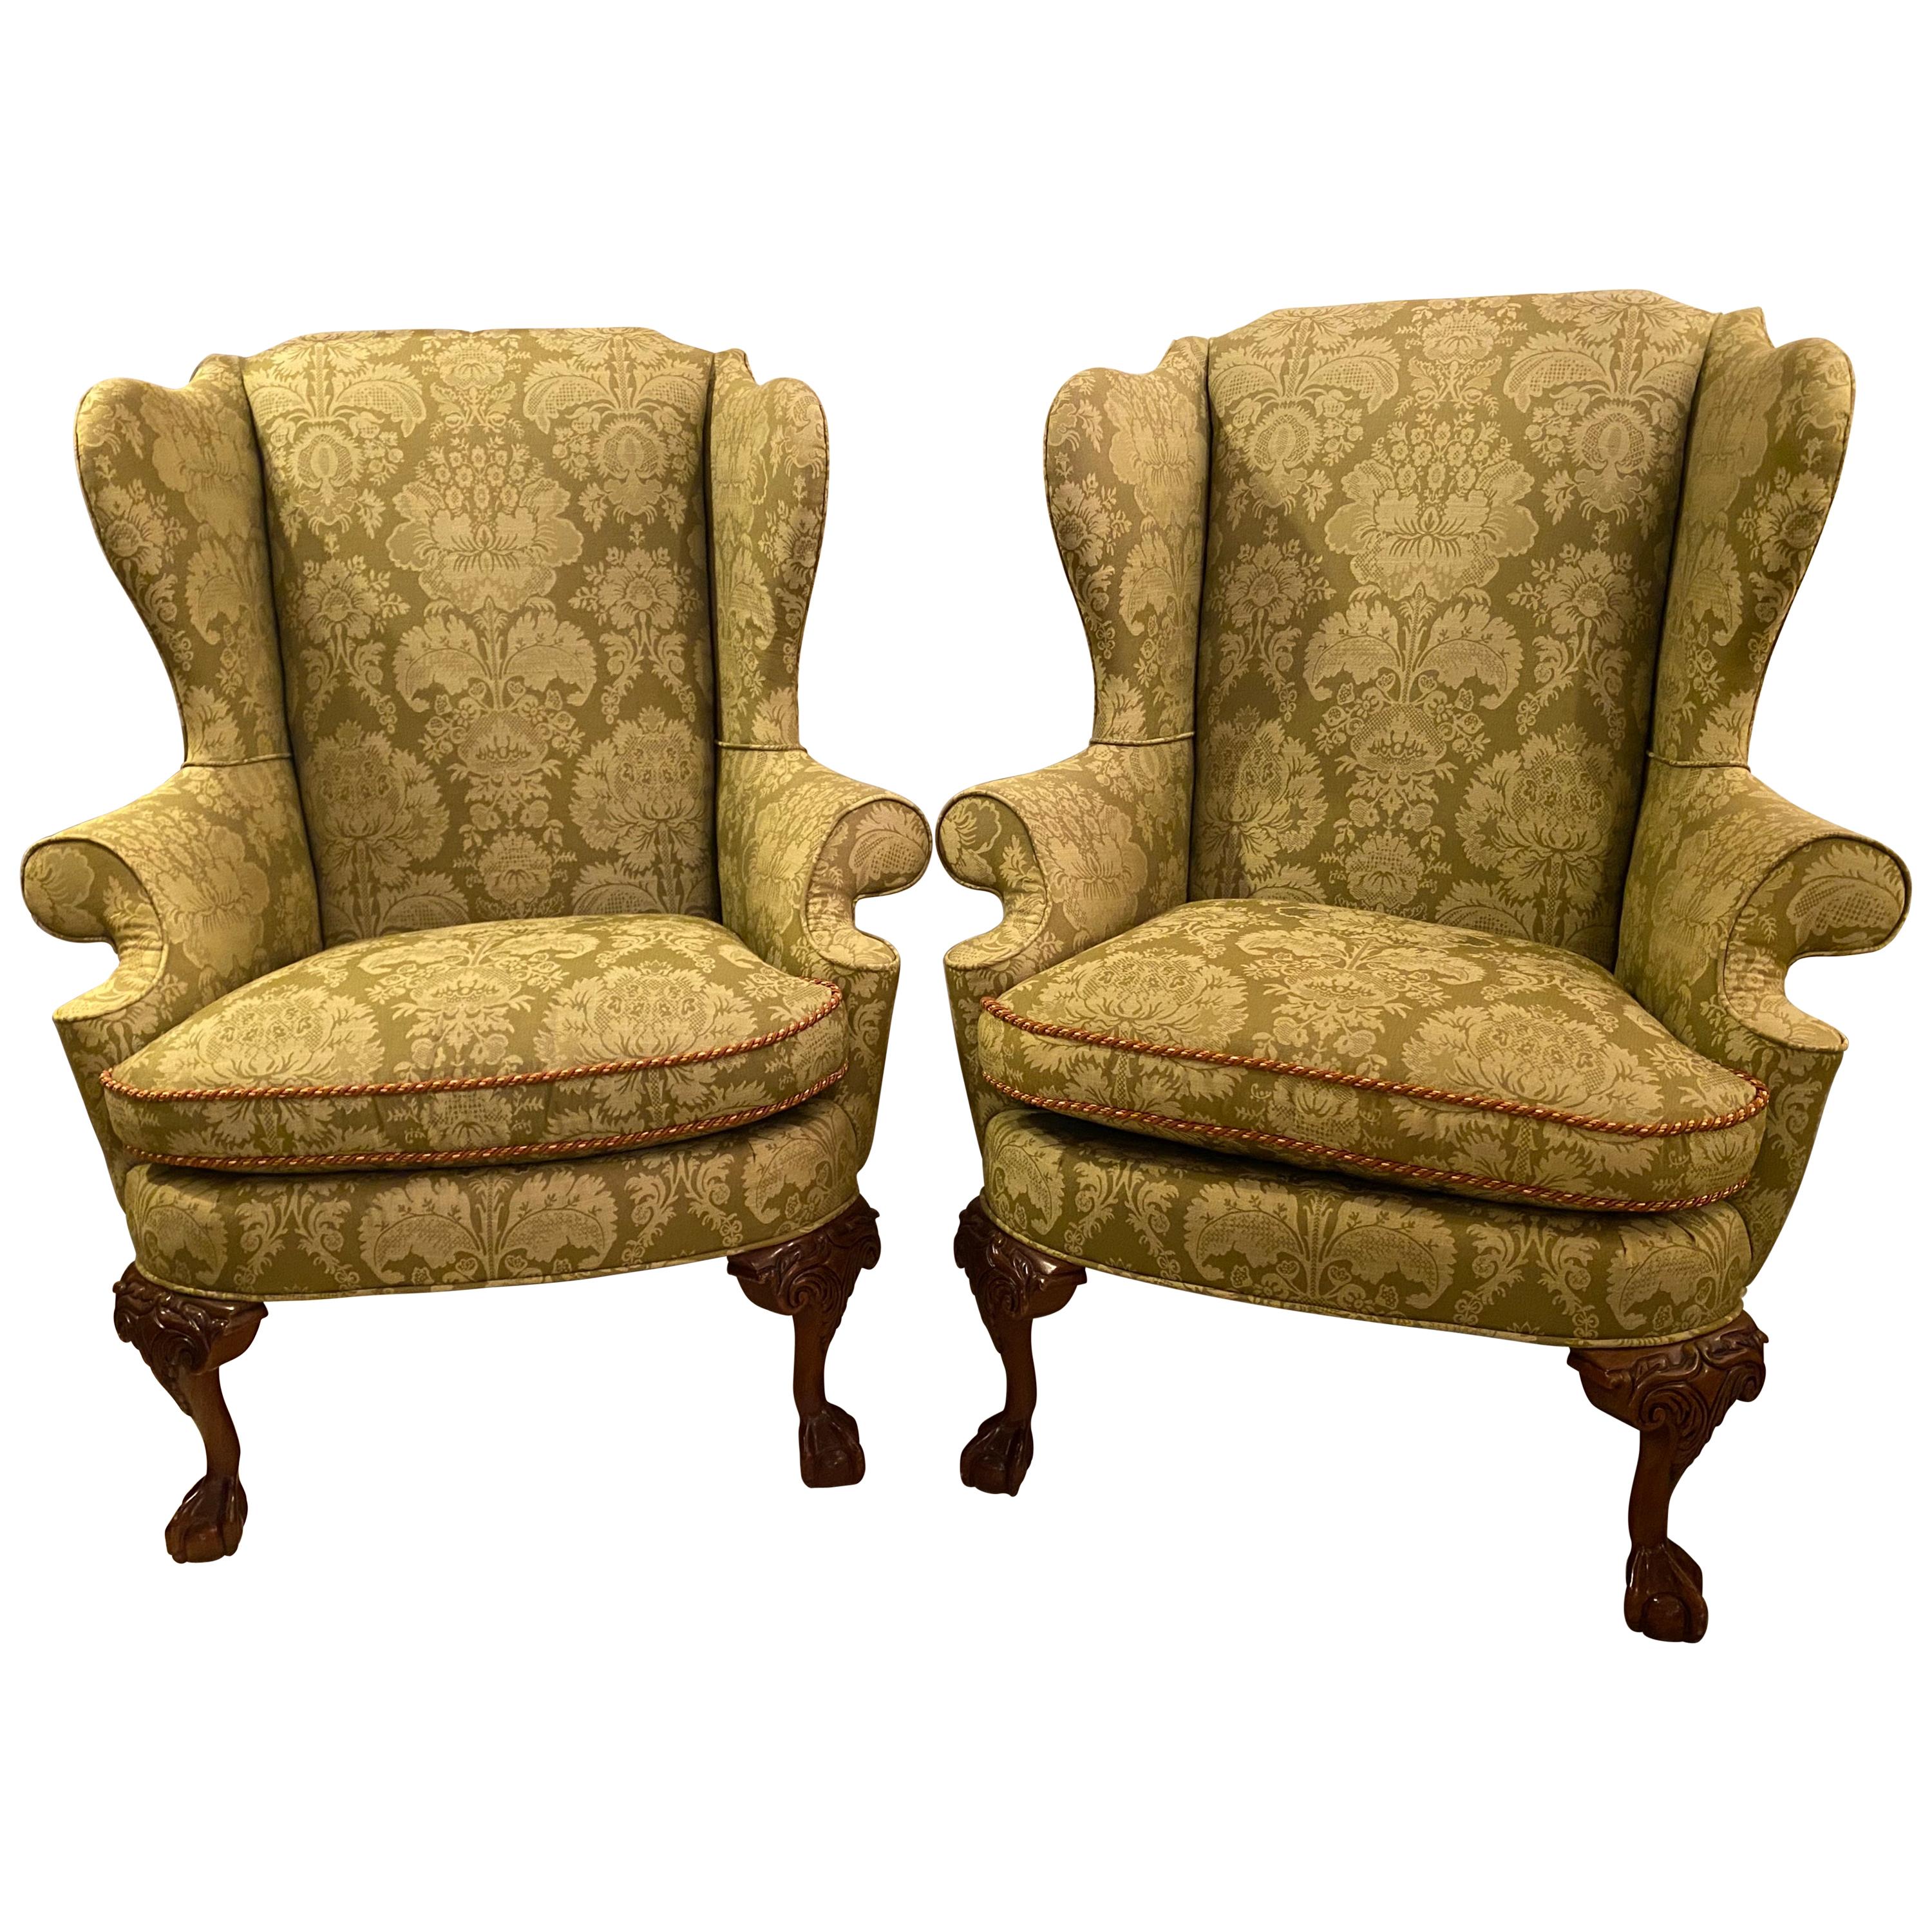 Chippendale Ball and Claw Wingback Chairs with Fine Scalamandre Upholstery, Pair